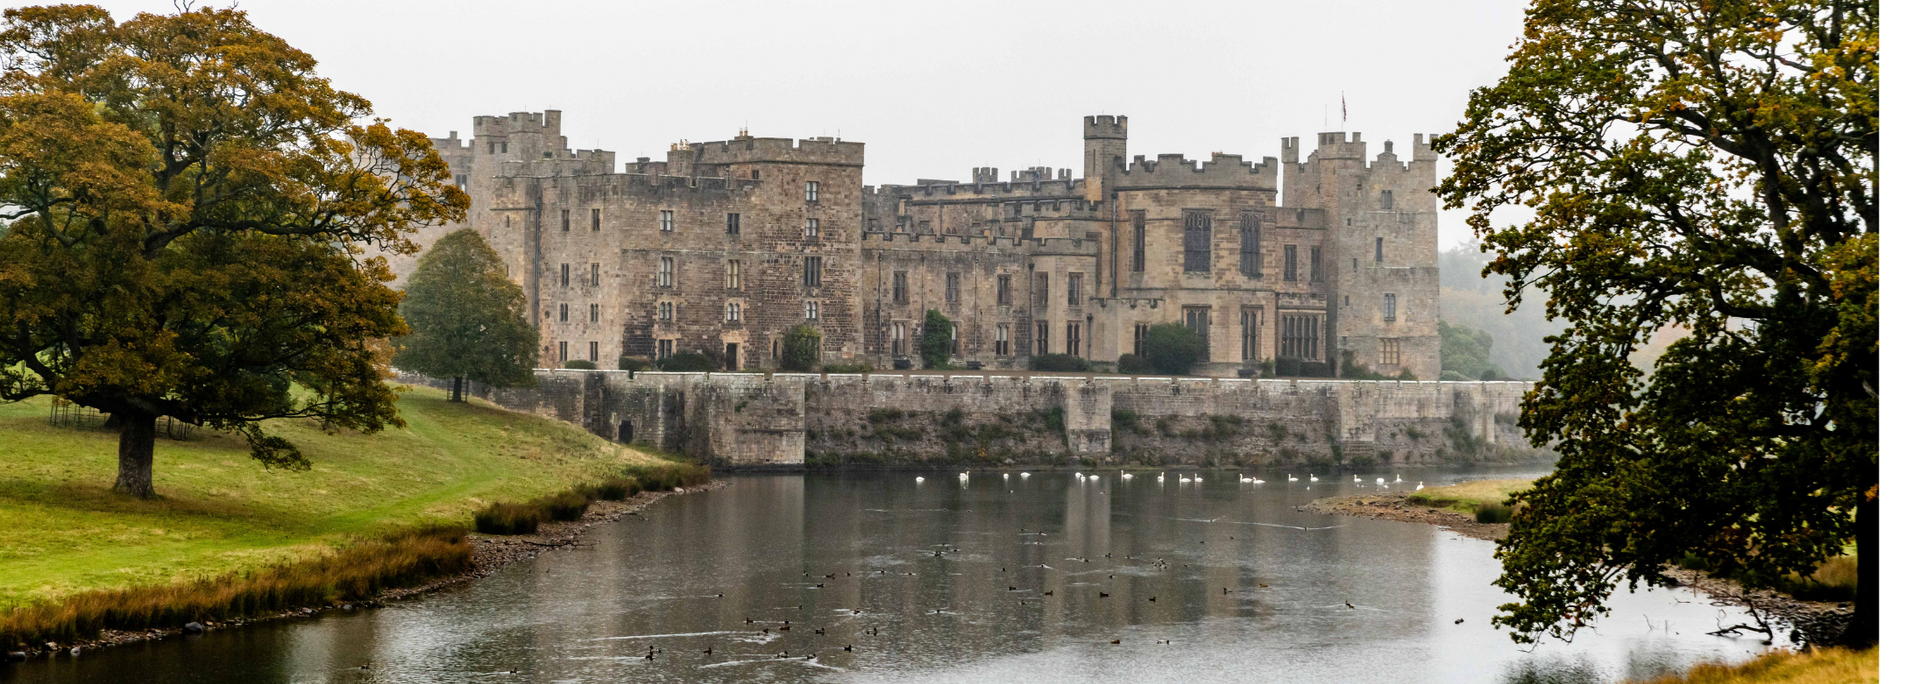 Picture of Raby Castle